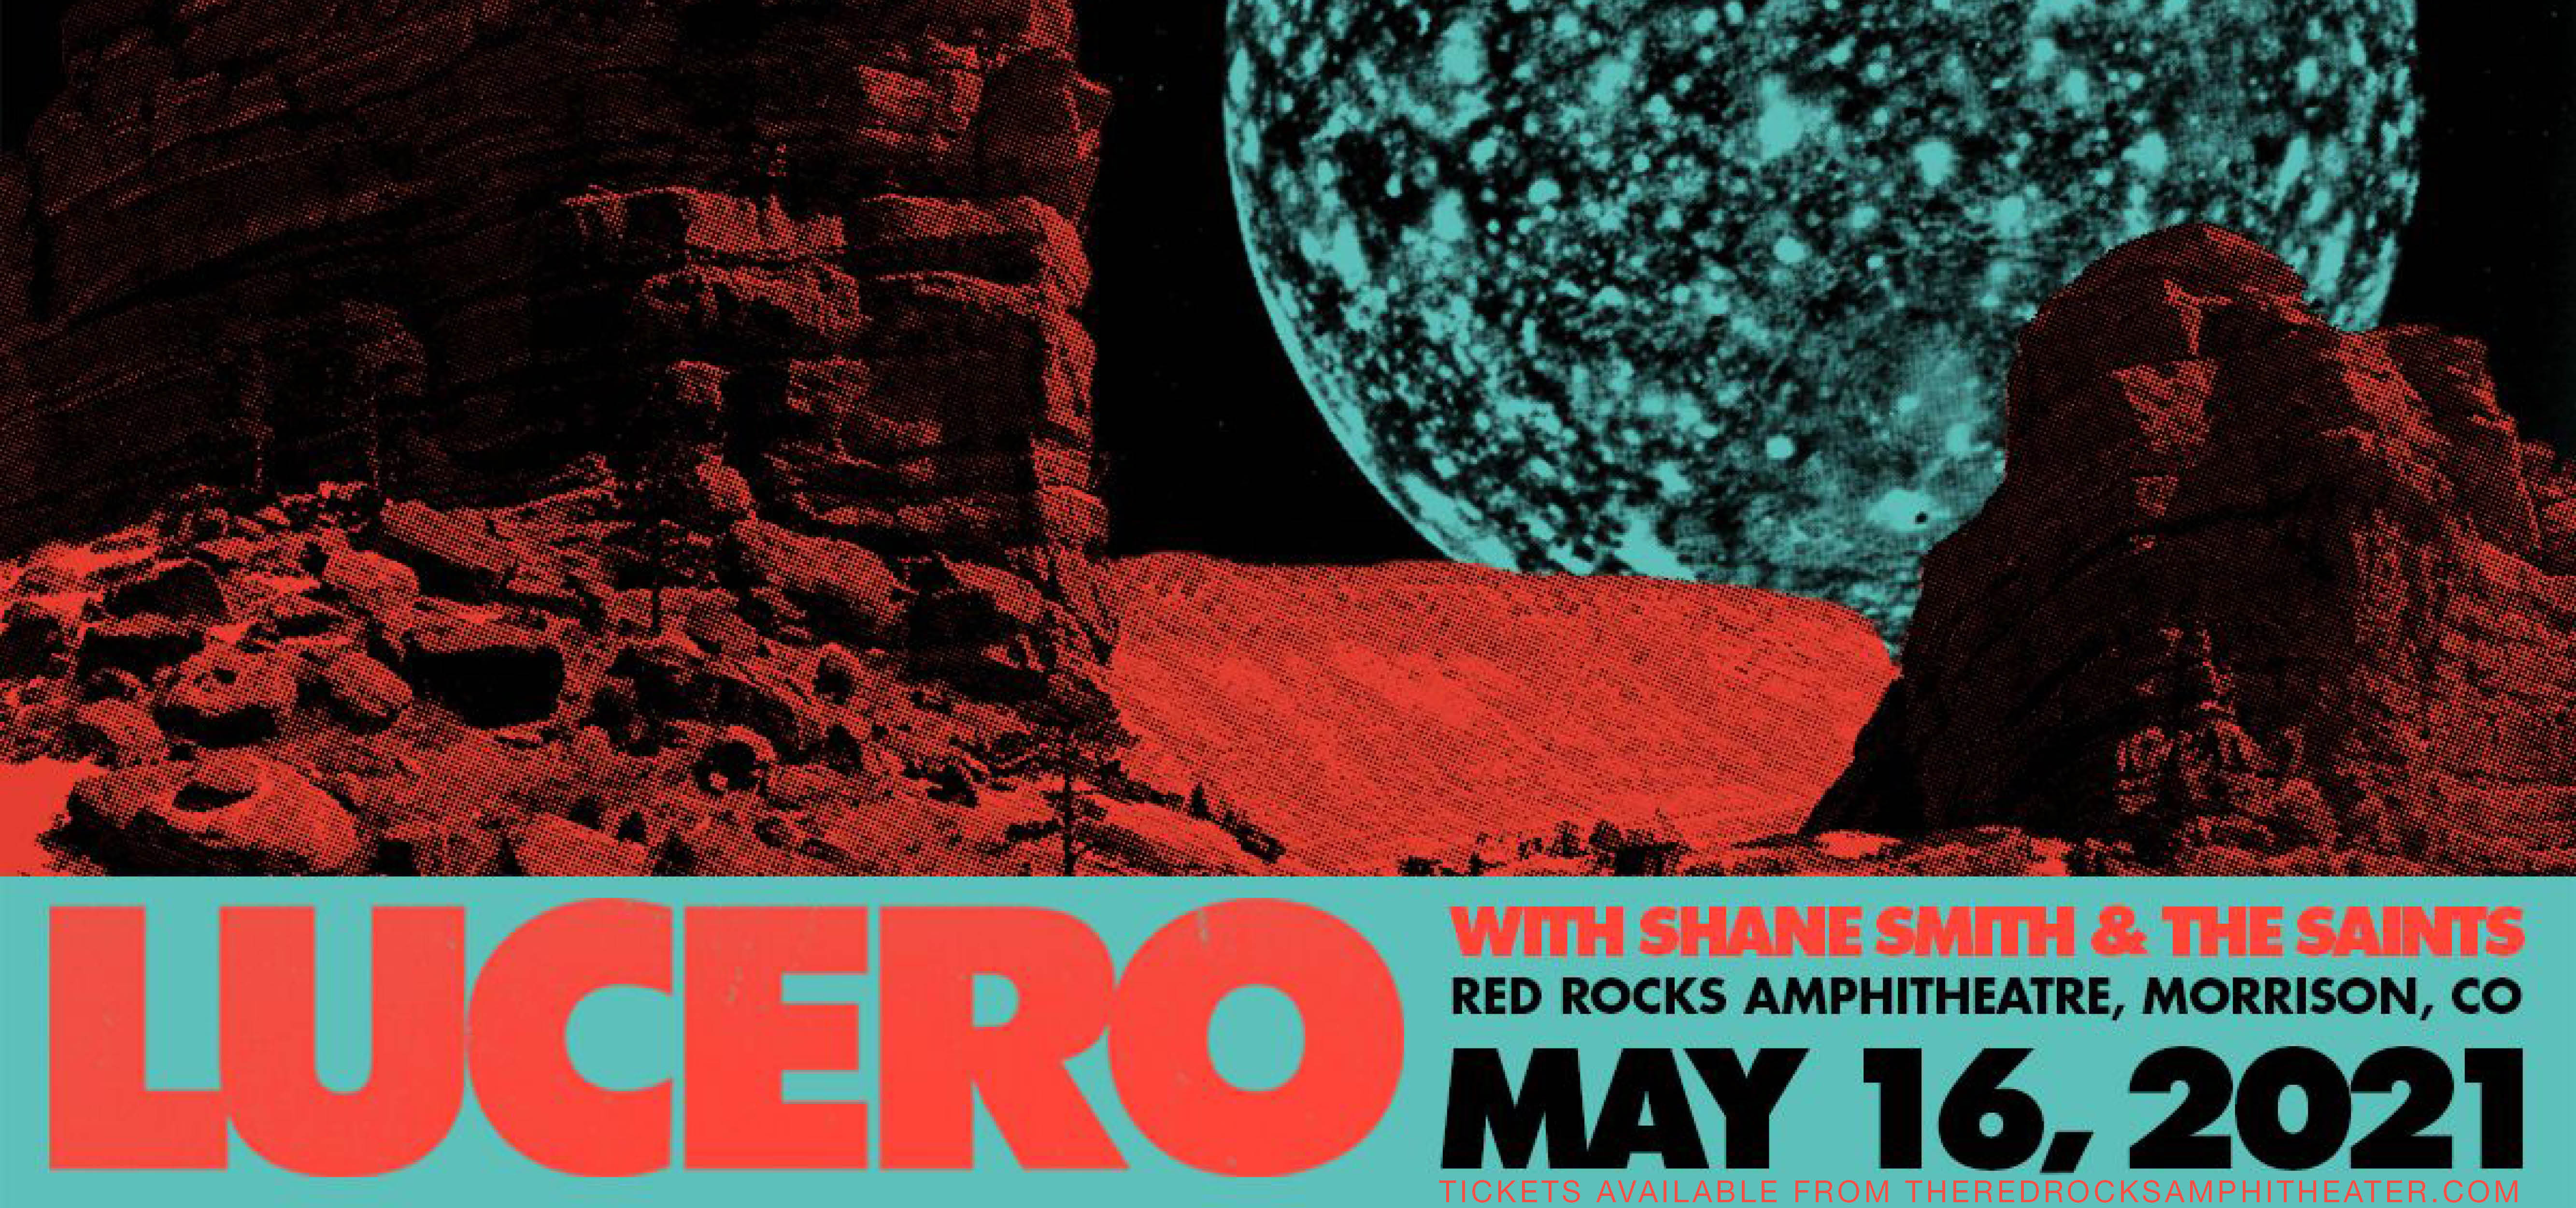 Lucero with Shane Smith and The Saints at Red Rocks Amphitheater